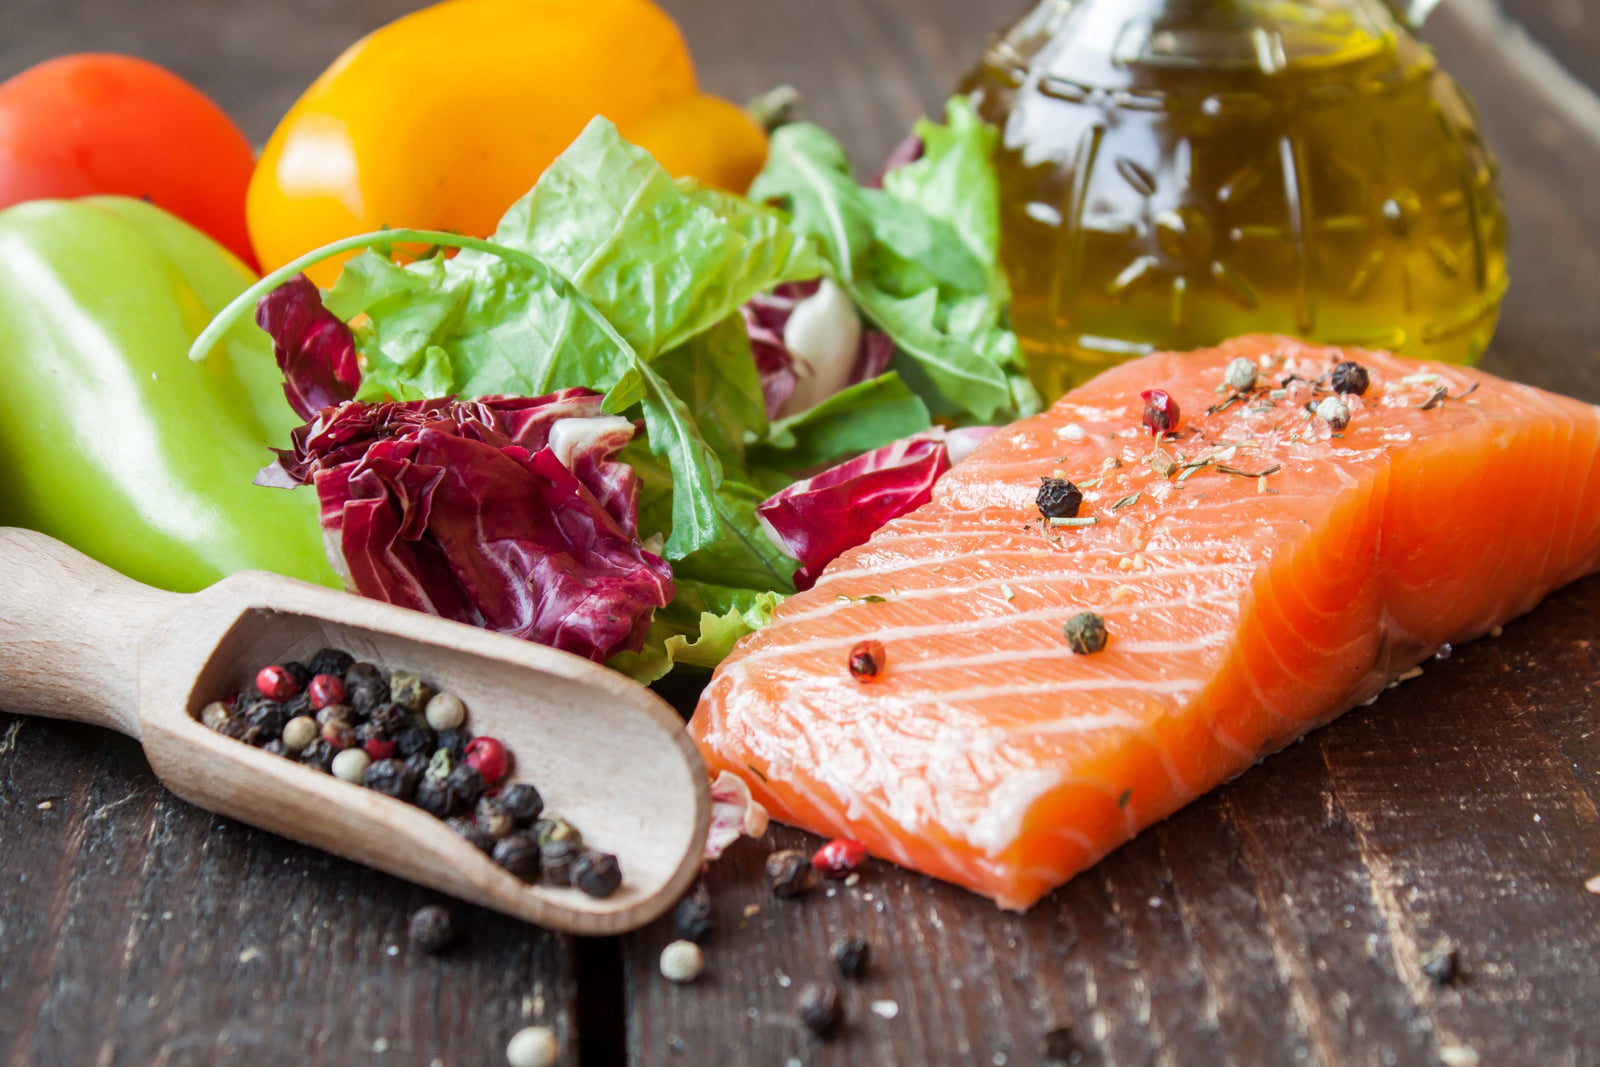 5 Things about Heart Health & the Omega-3 Index You Need to Know